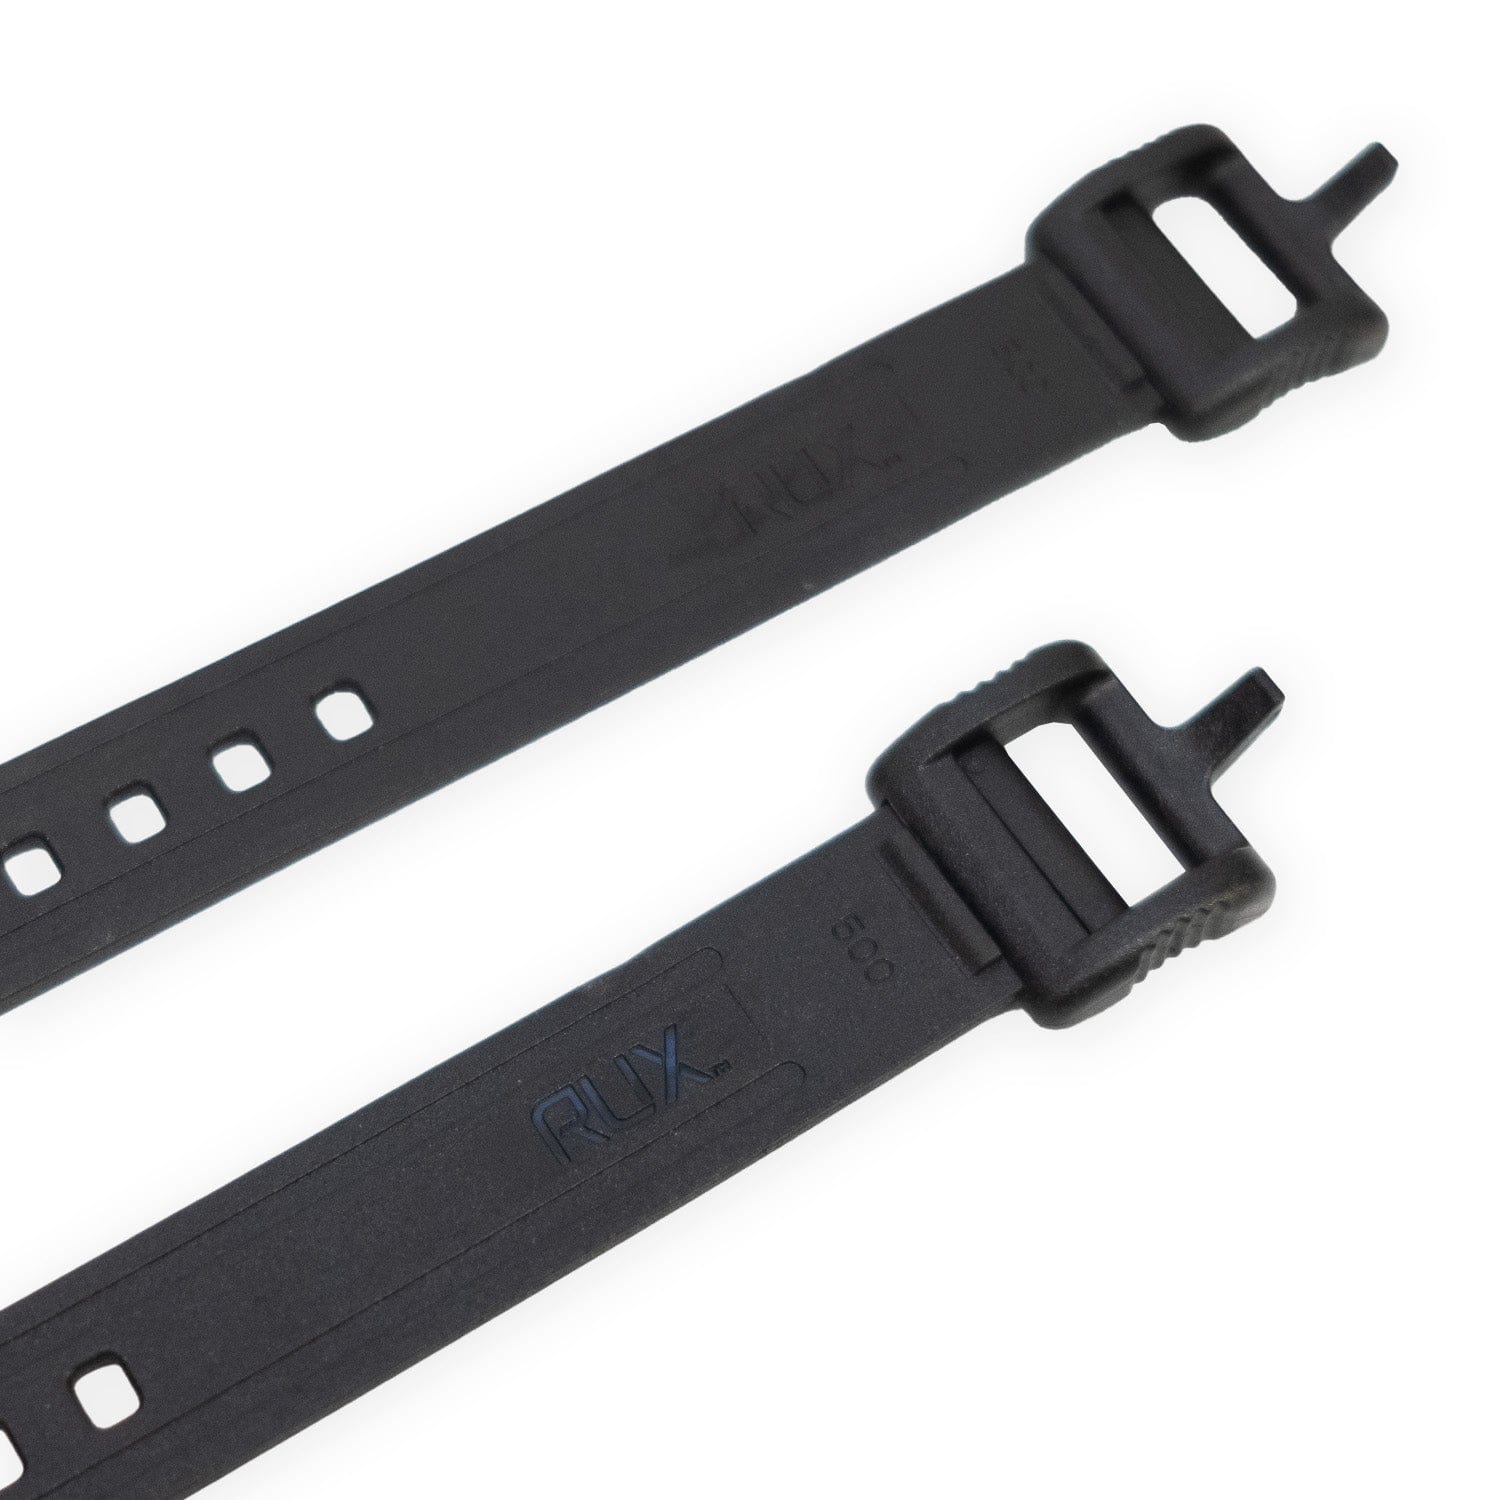 Clip on Strap Buckles for Cargo Trailer Tie Downs - China Strap